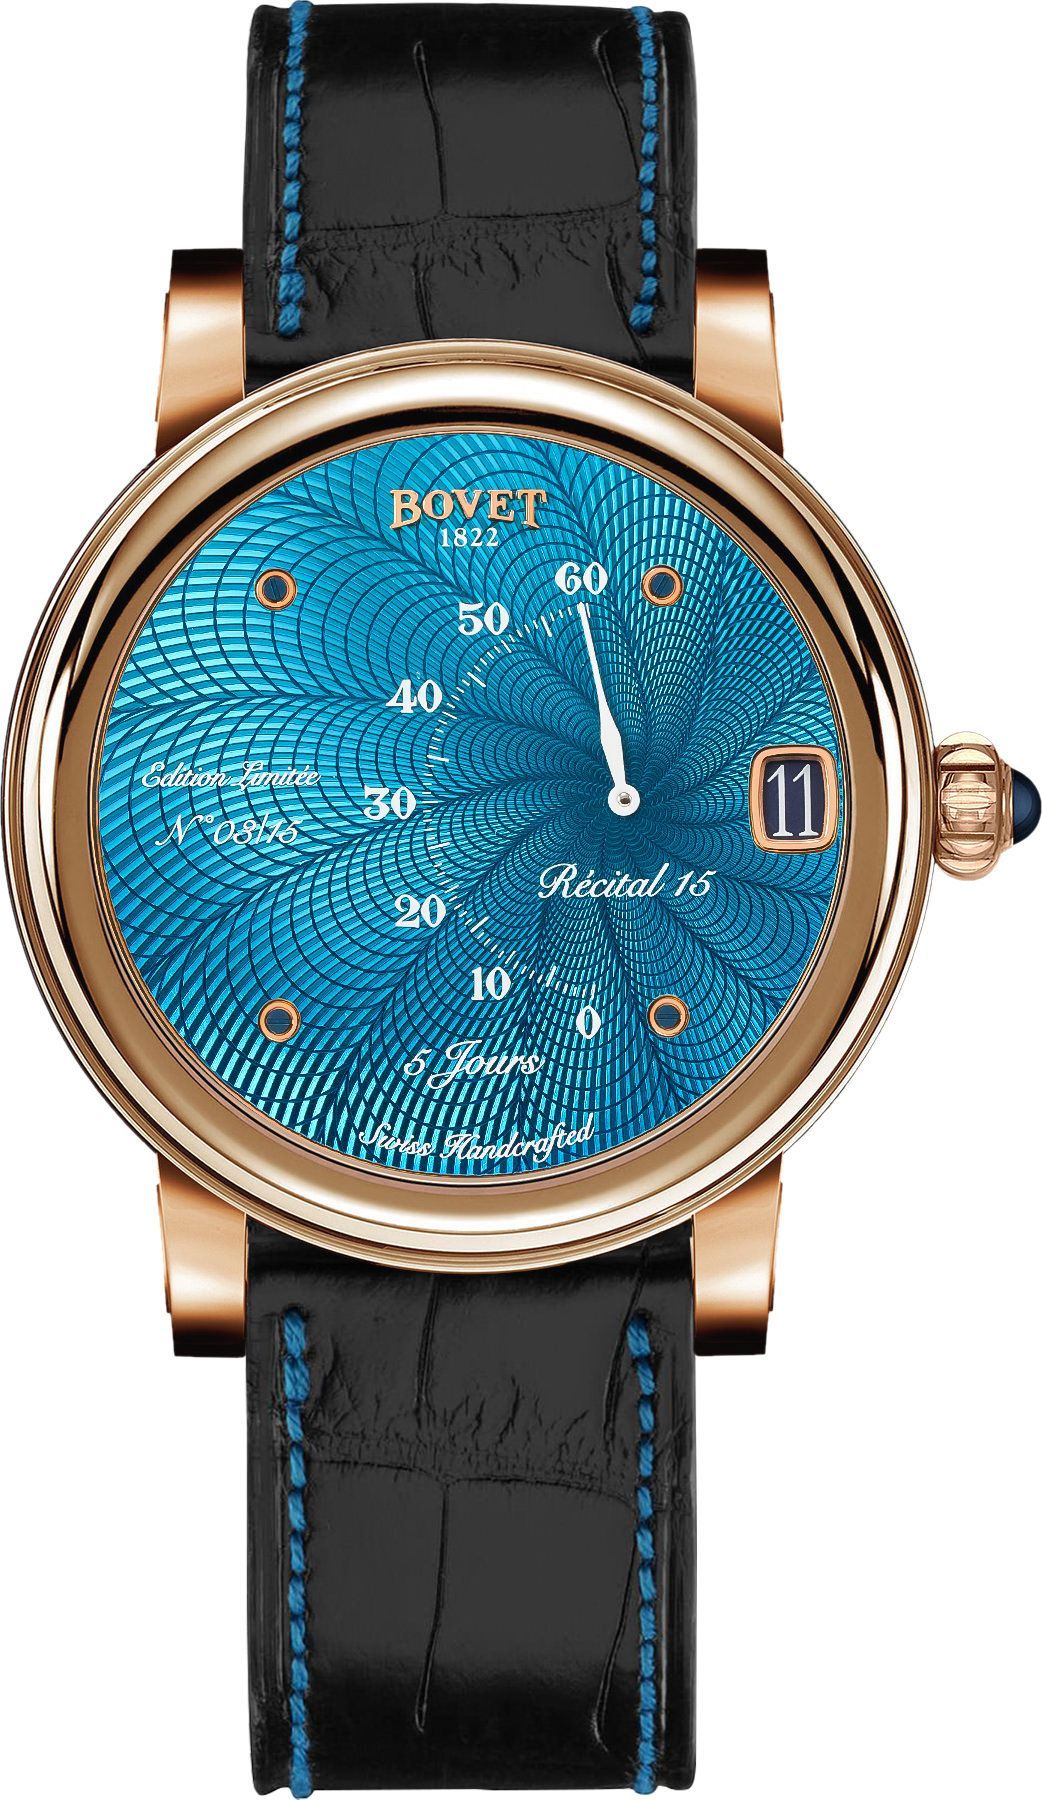 Bovet Dimier Récital 15 Turquoise Dial 42 mm Manual Winding Watch For Men - 1